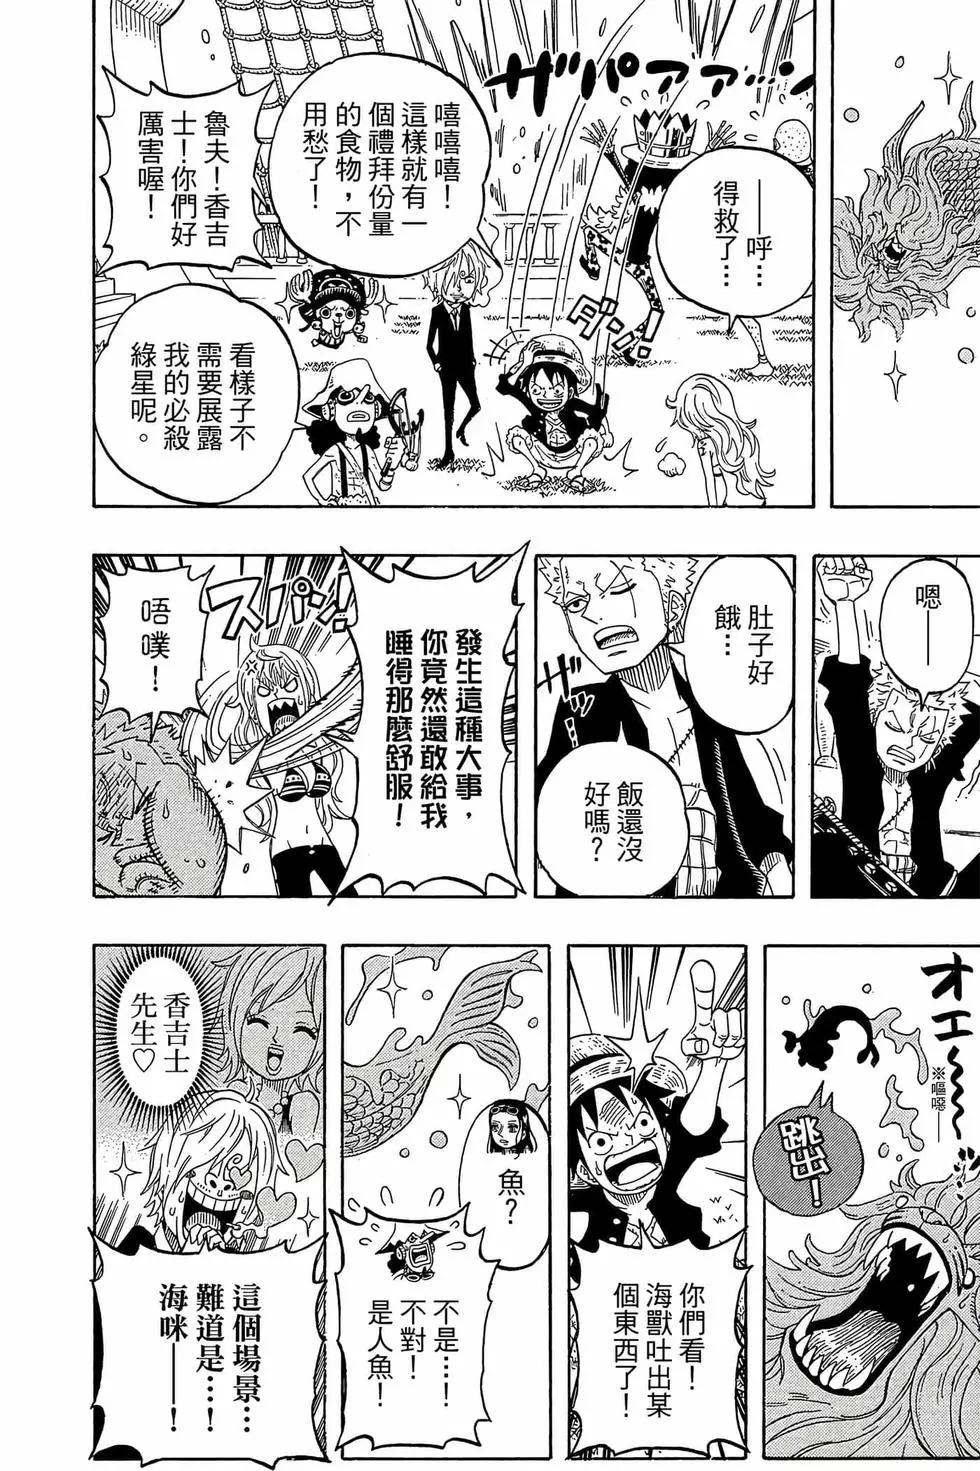 One piece party - 第01卷(1/4) - 7